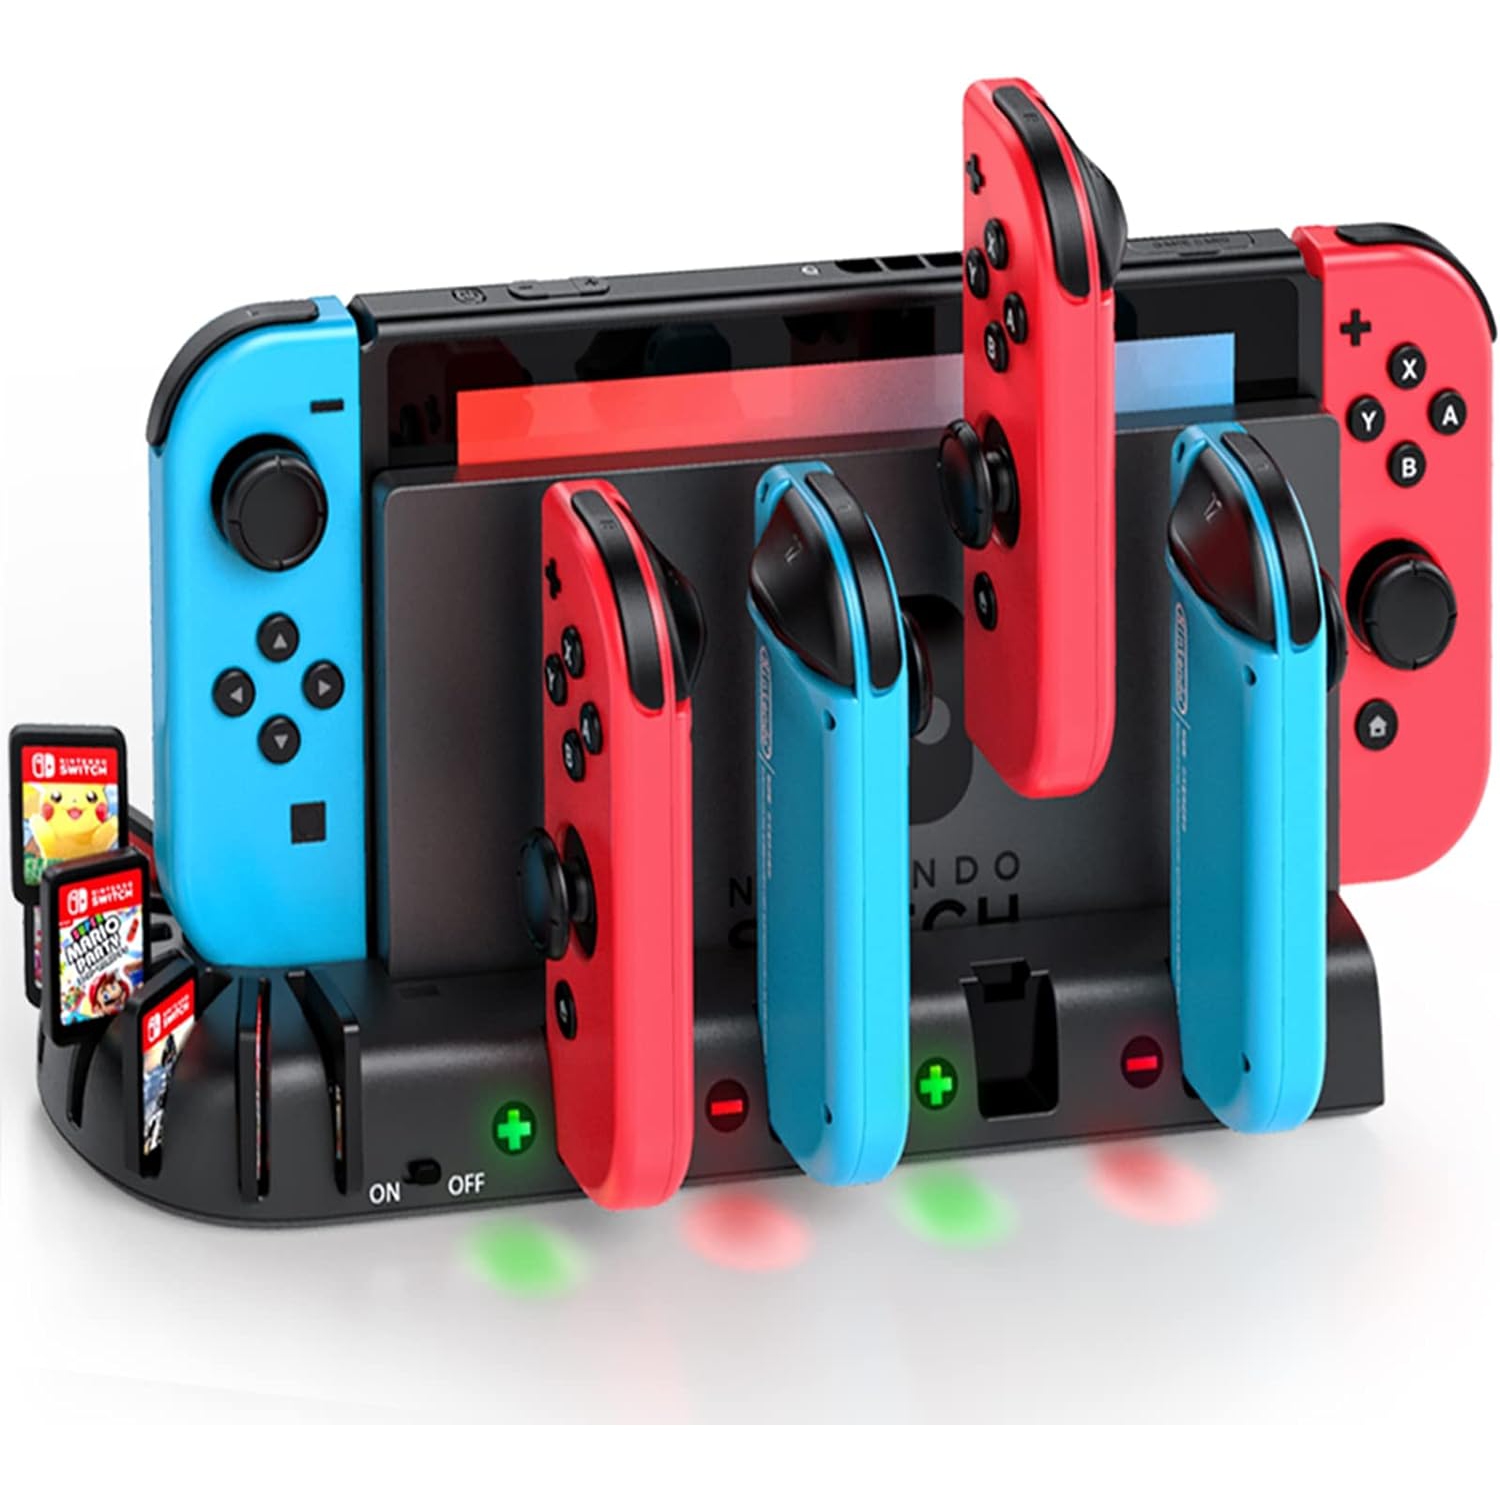 BoostBlossom witch Controller Charging Dock Station Compatible with Nintendo Switch & OLED Model Joy-Cons, Features Upgraded 8 Game Storage for Nintendo Switch Joy-Cons & Games.